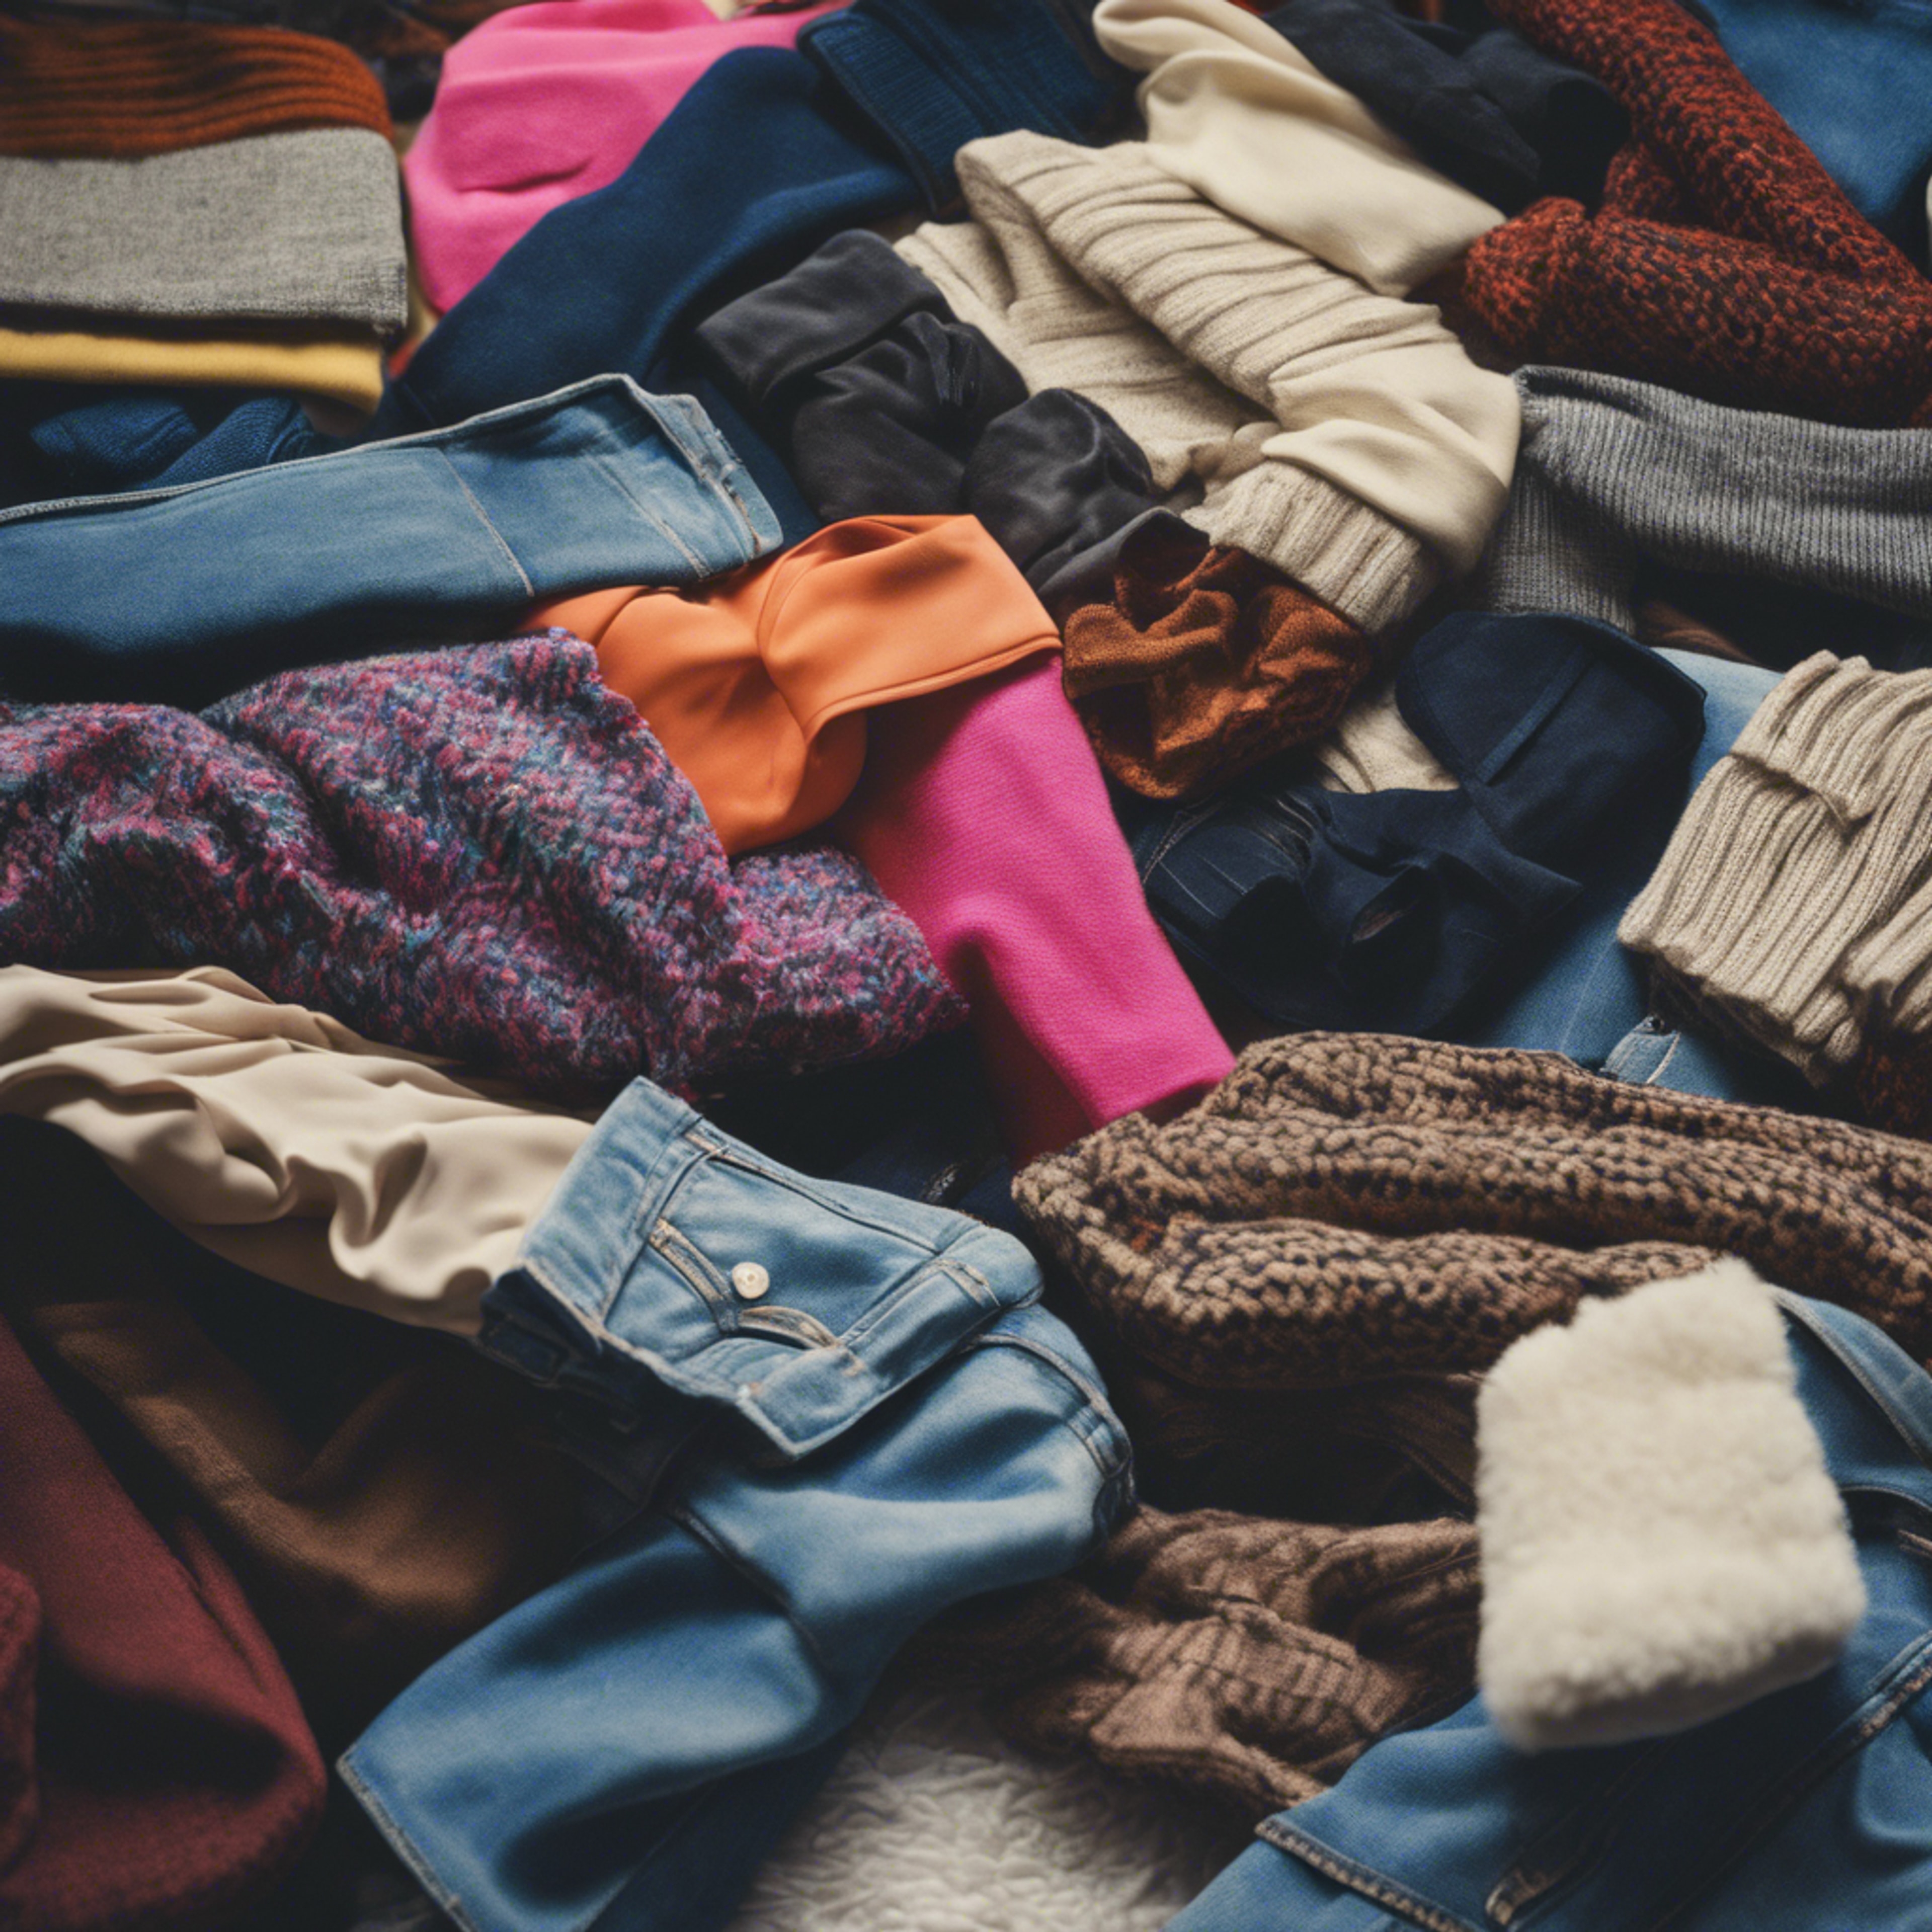 A pile of iconic 80s fashions such as leg warmers, oversized blazers, and high-waisted jeans. Tapeta[dbd69f645b7844d6a4c4]